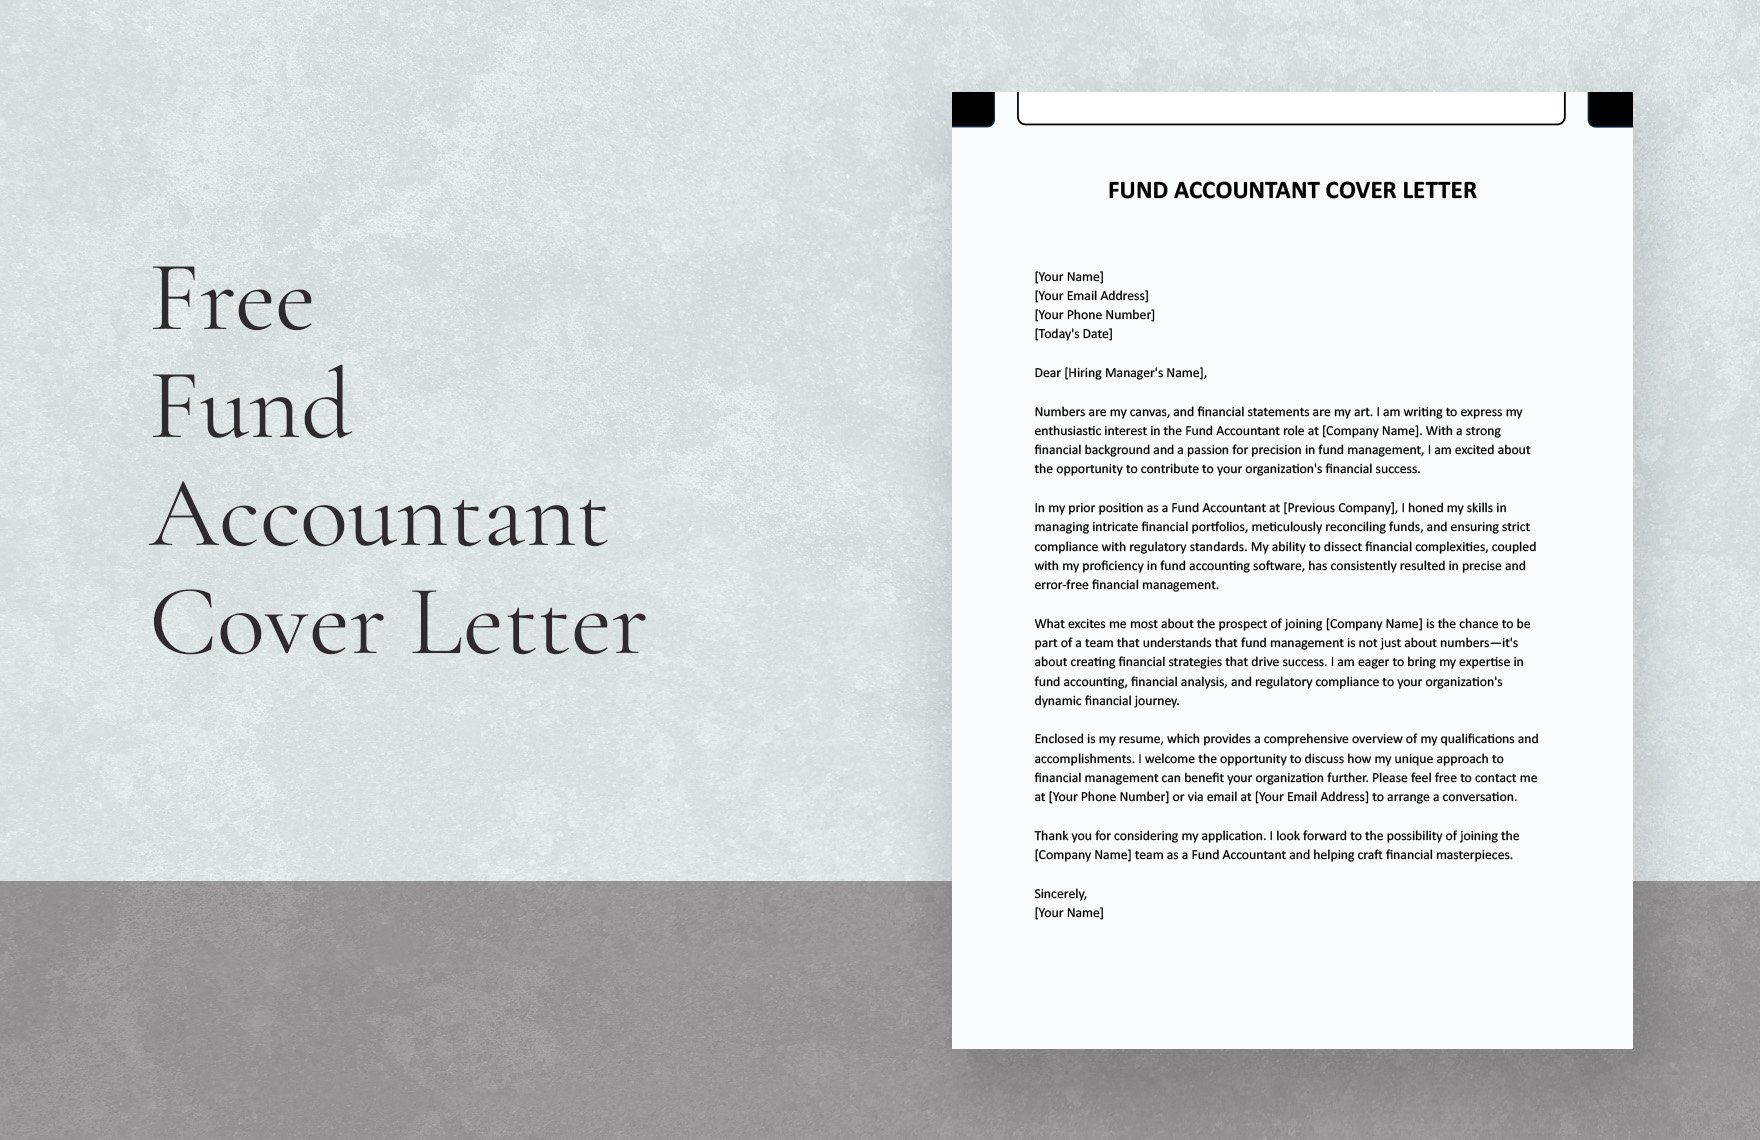 Fund Accountant Cover Letter